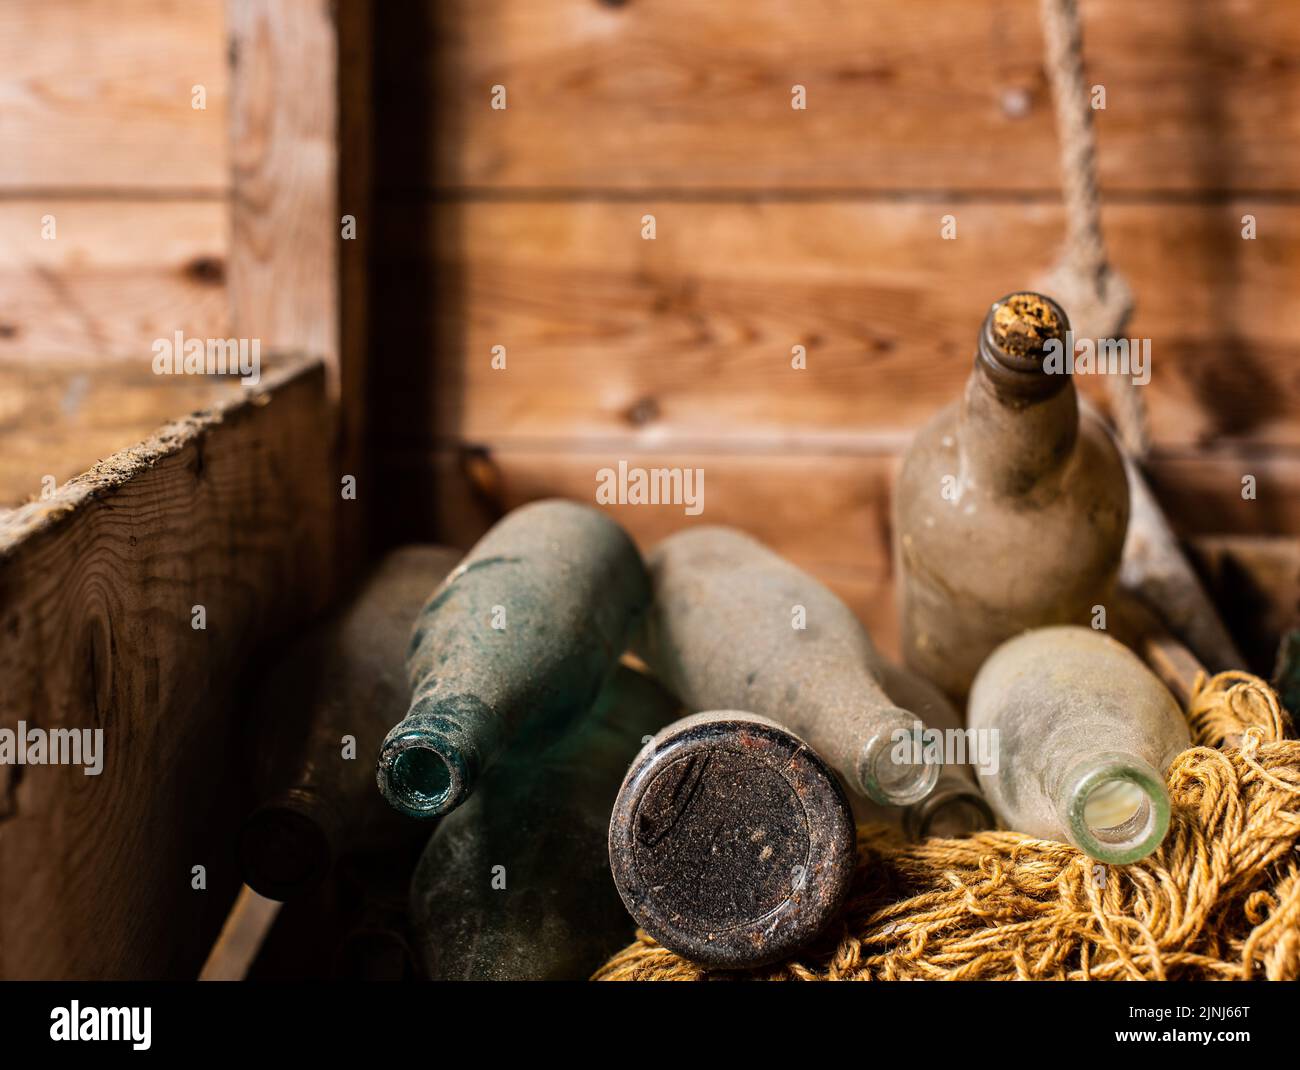 A closeup shot of antique historic bottles in a box Stock Photo